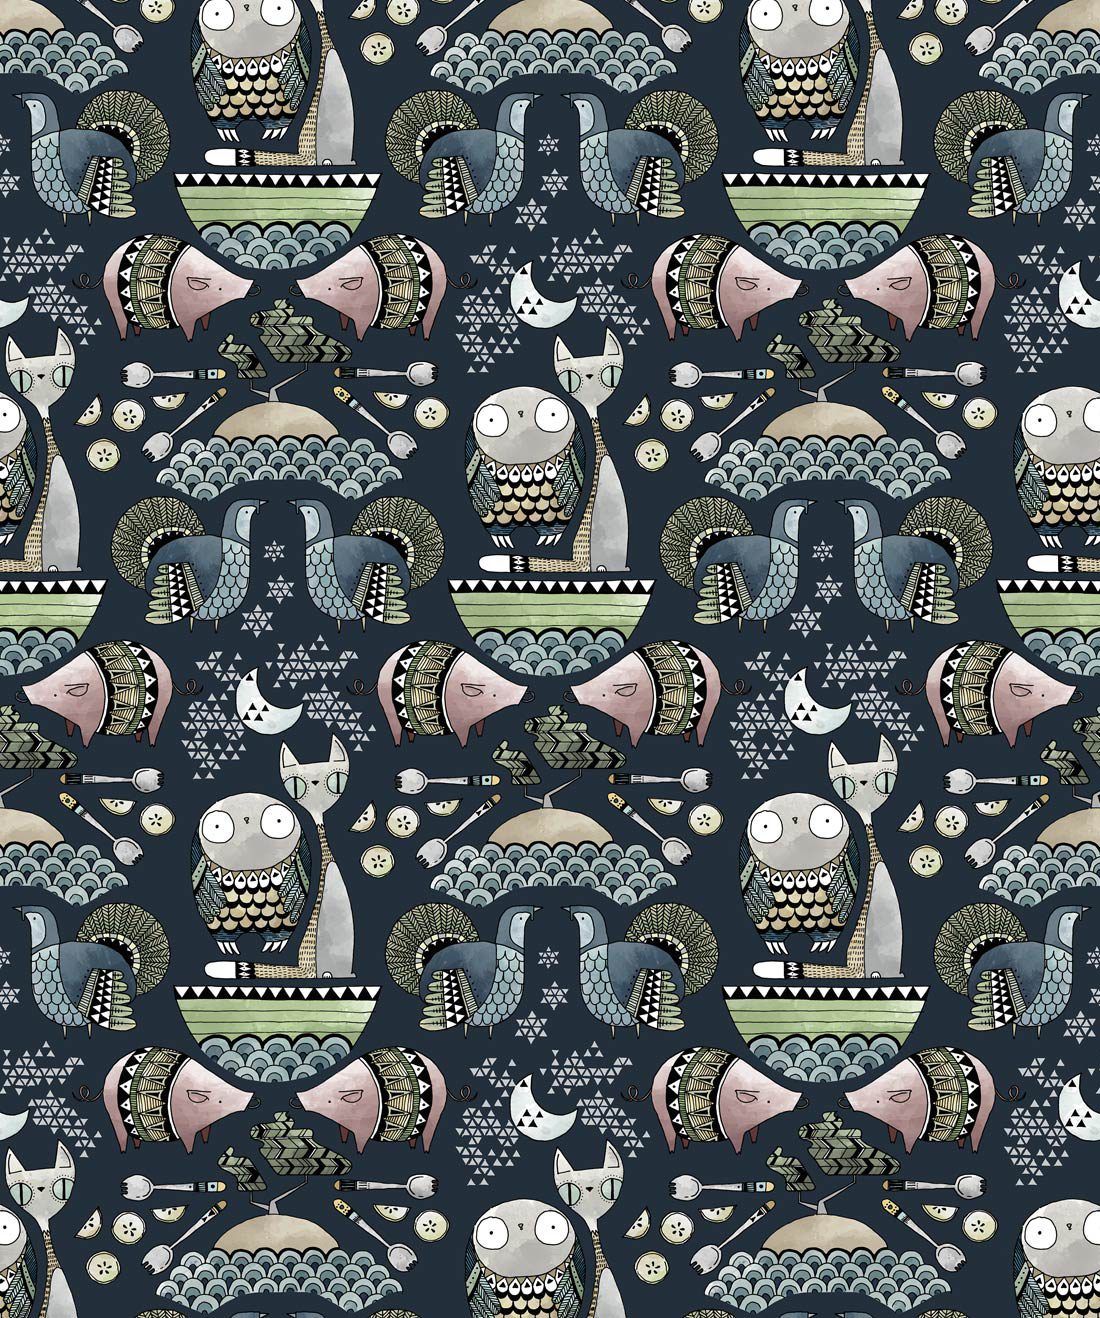 Owl and Pussycat is a folk animal wallpaper